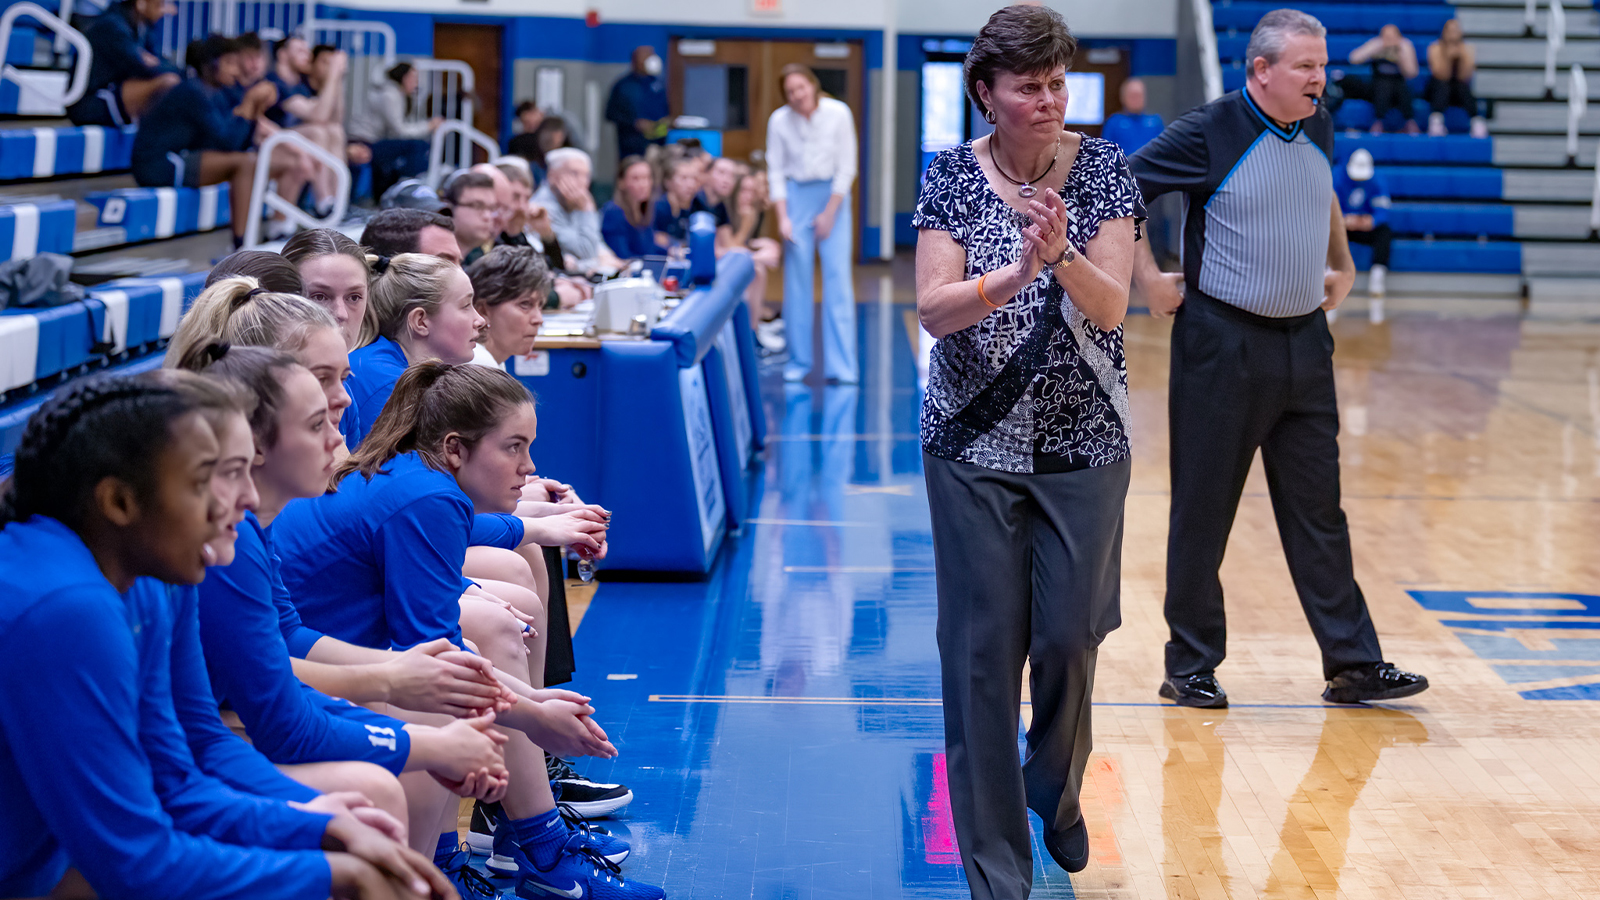 Assumption University coach Kerry Phayre has coached the Greyhounds to the best season in program history during the 2022-23 campaign.